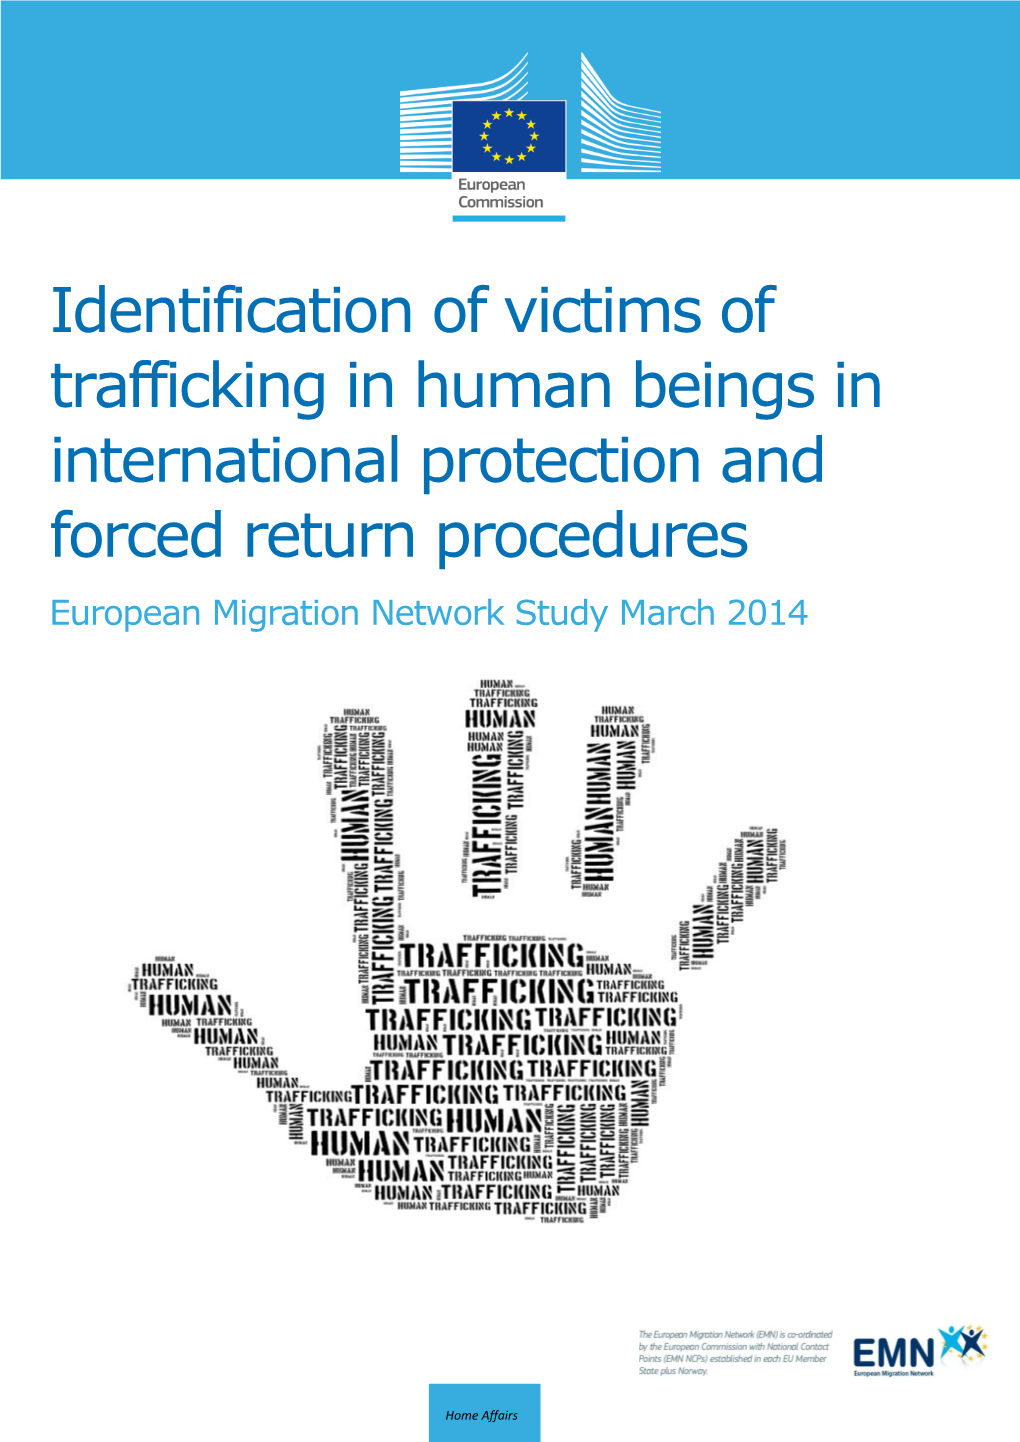 Identification of Victims of Trafficking in Human Beings in International Protection and Forced Return Procedures European Migration Network Study March 2014